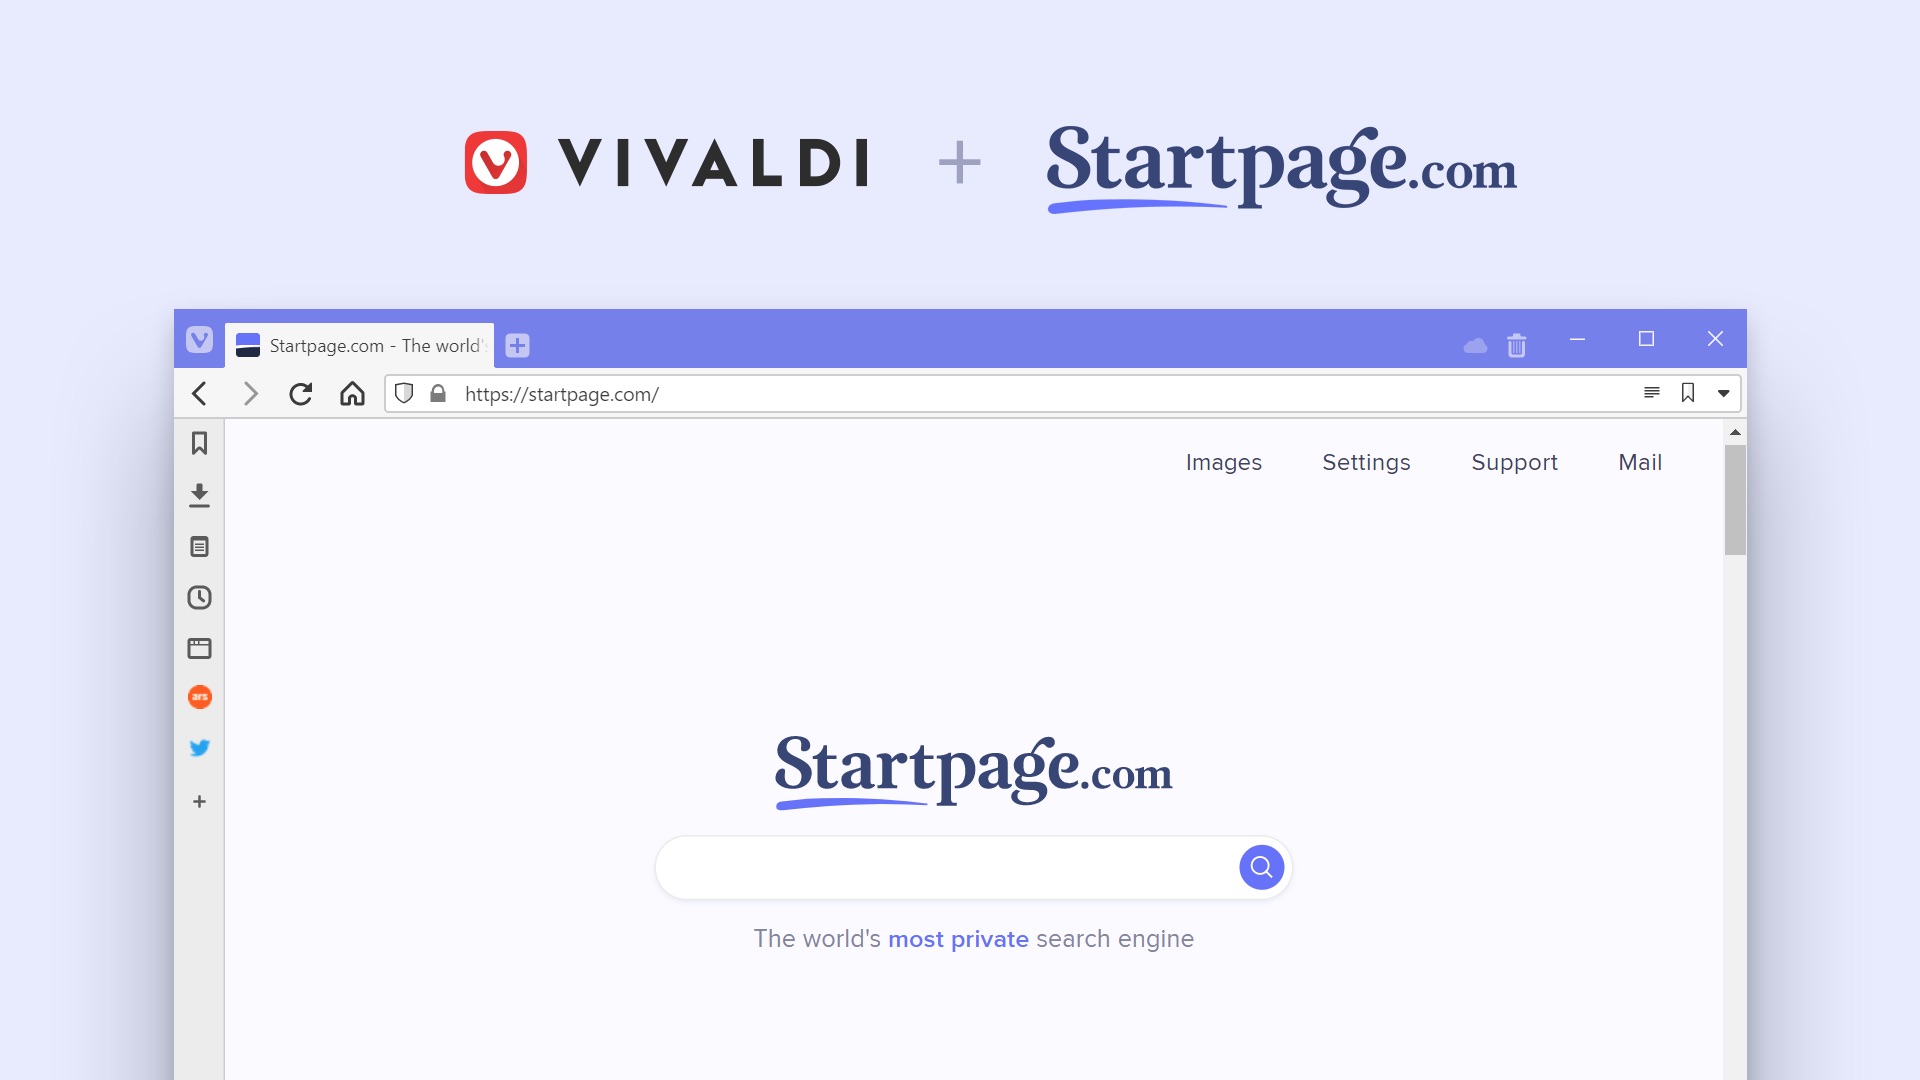 Vivaldi Web Browser Gives Users More Privacy Options with Startpage